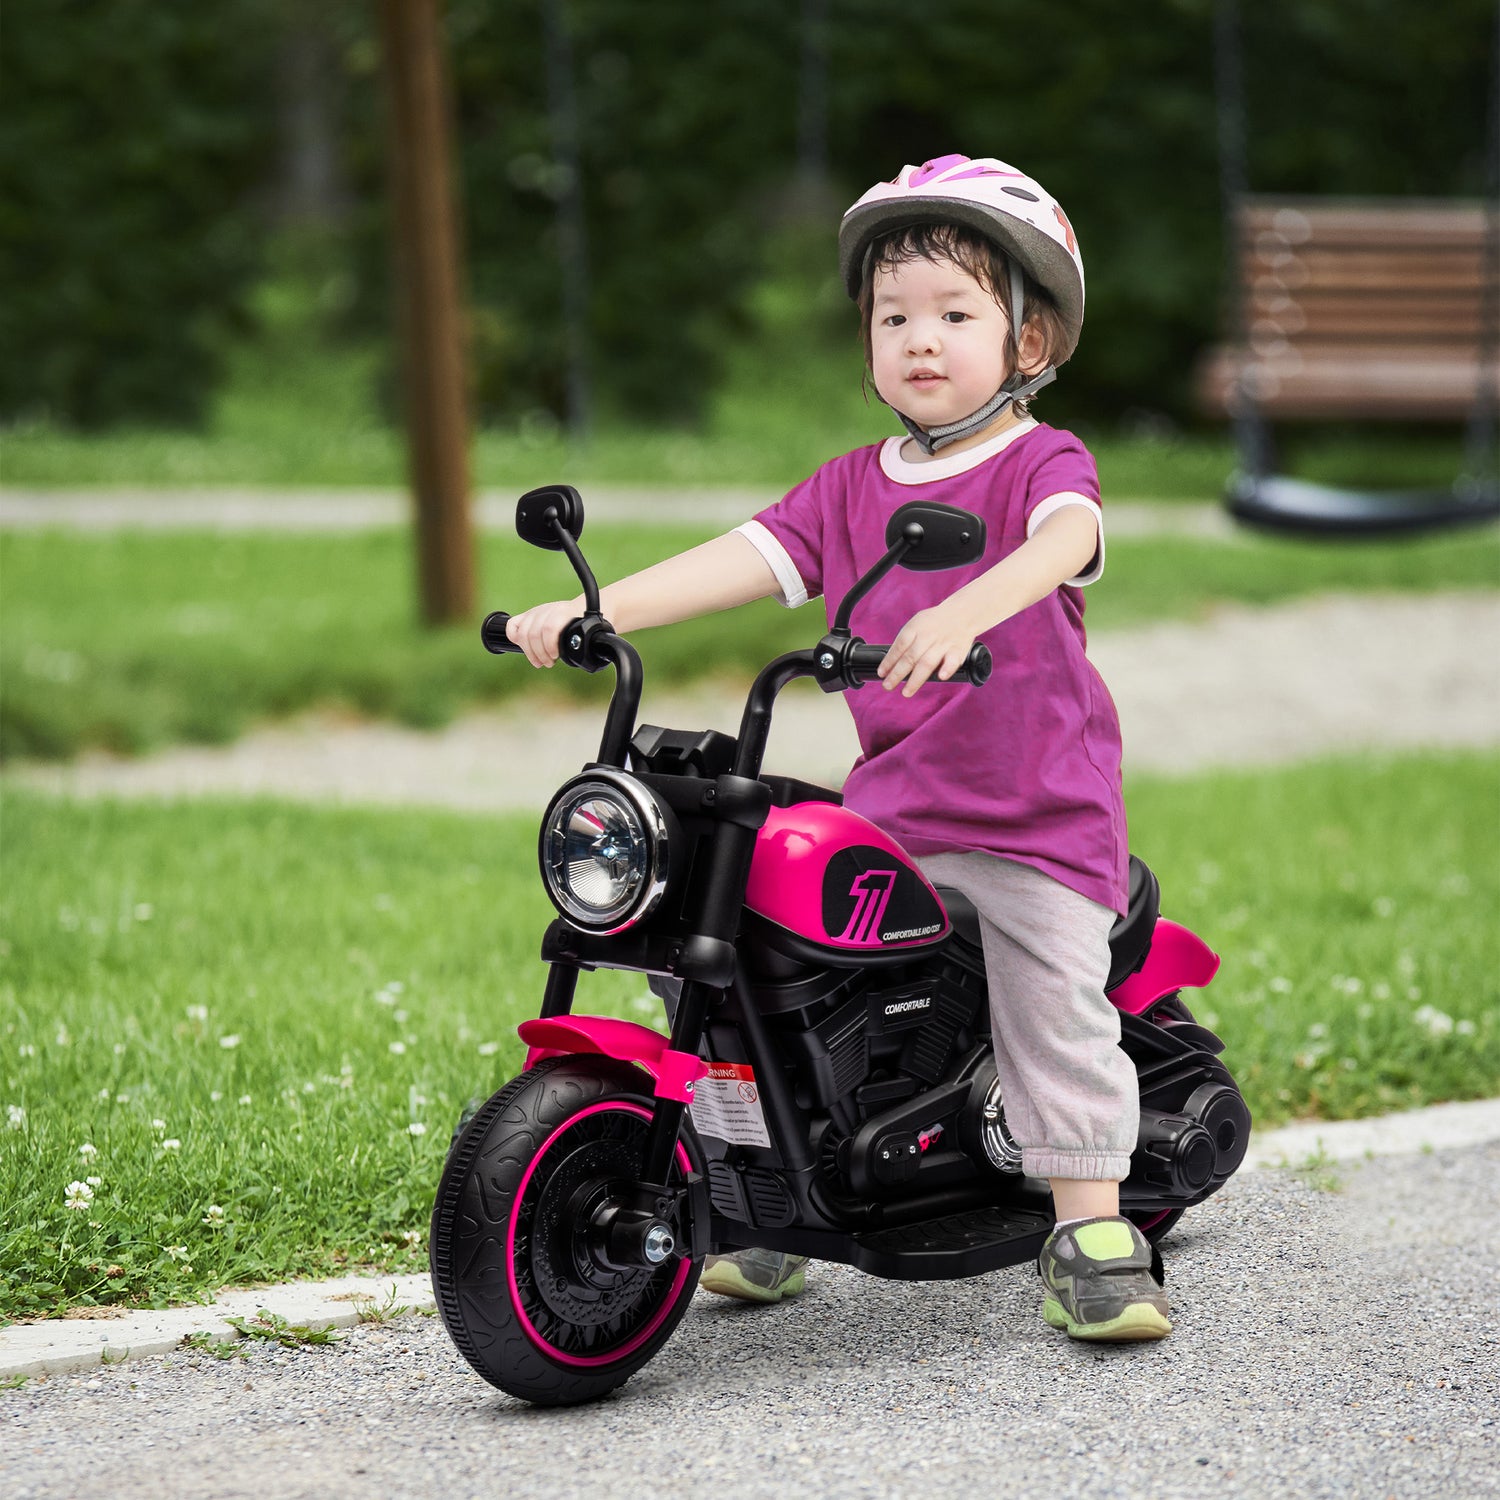 HOMCOM 6v Electric Motorbike with Training Wheels, One-Button